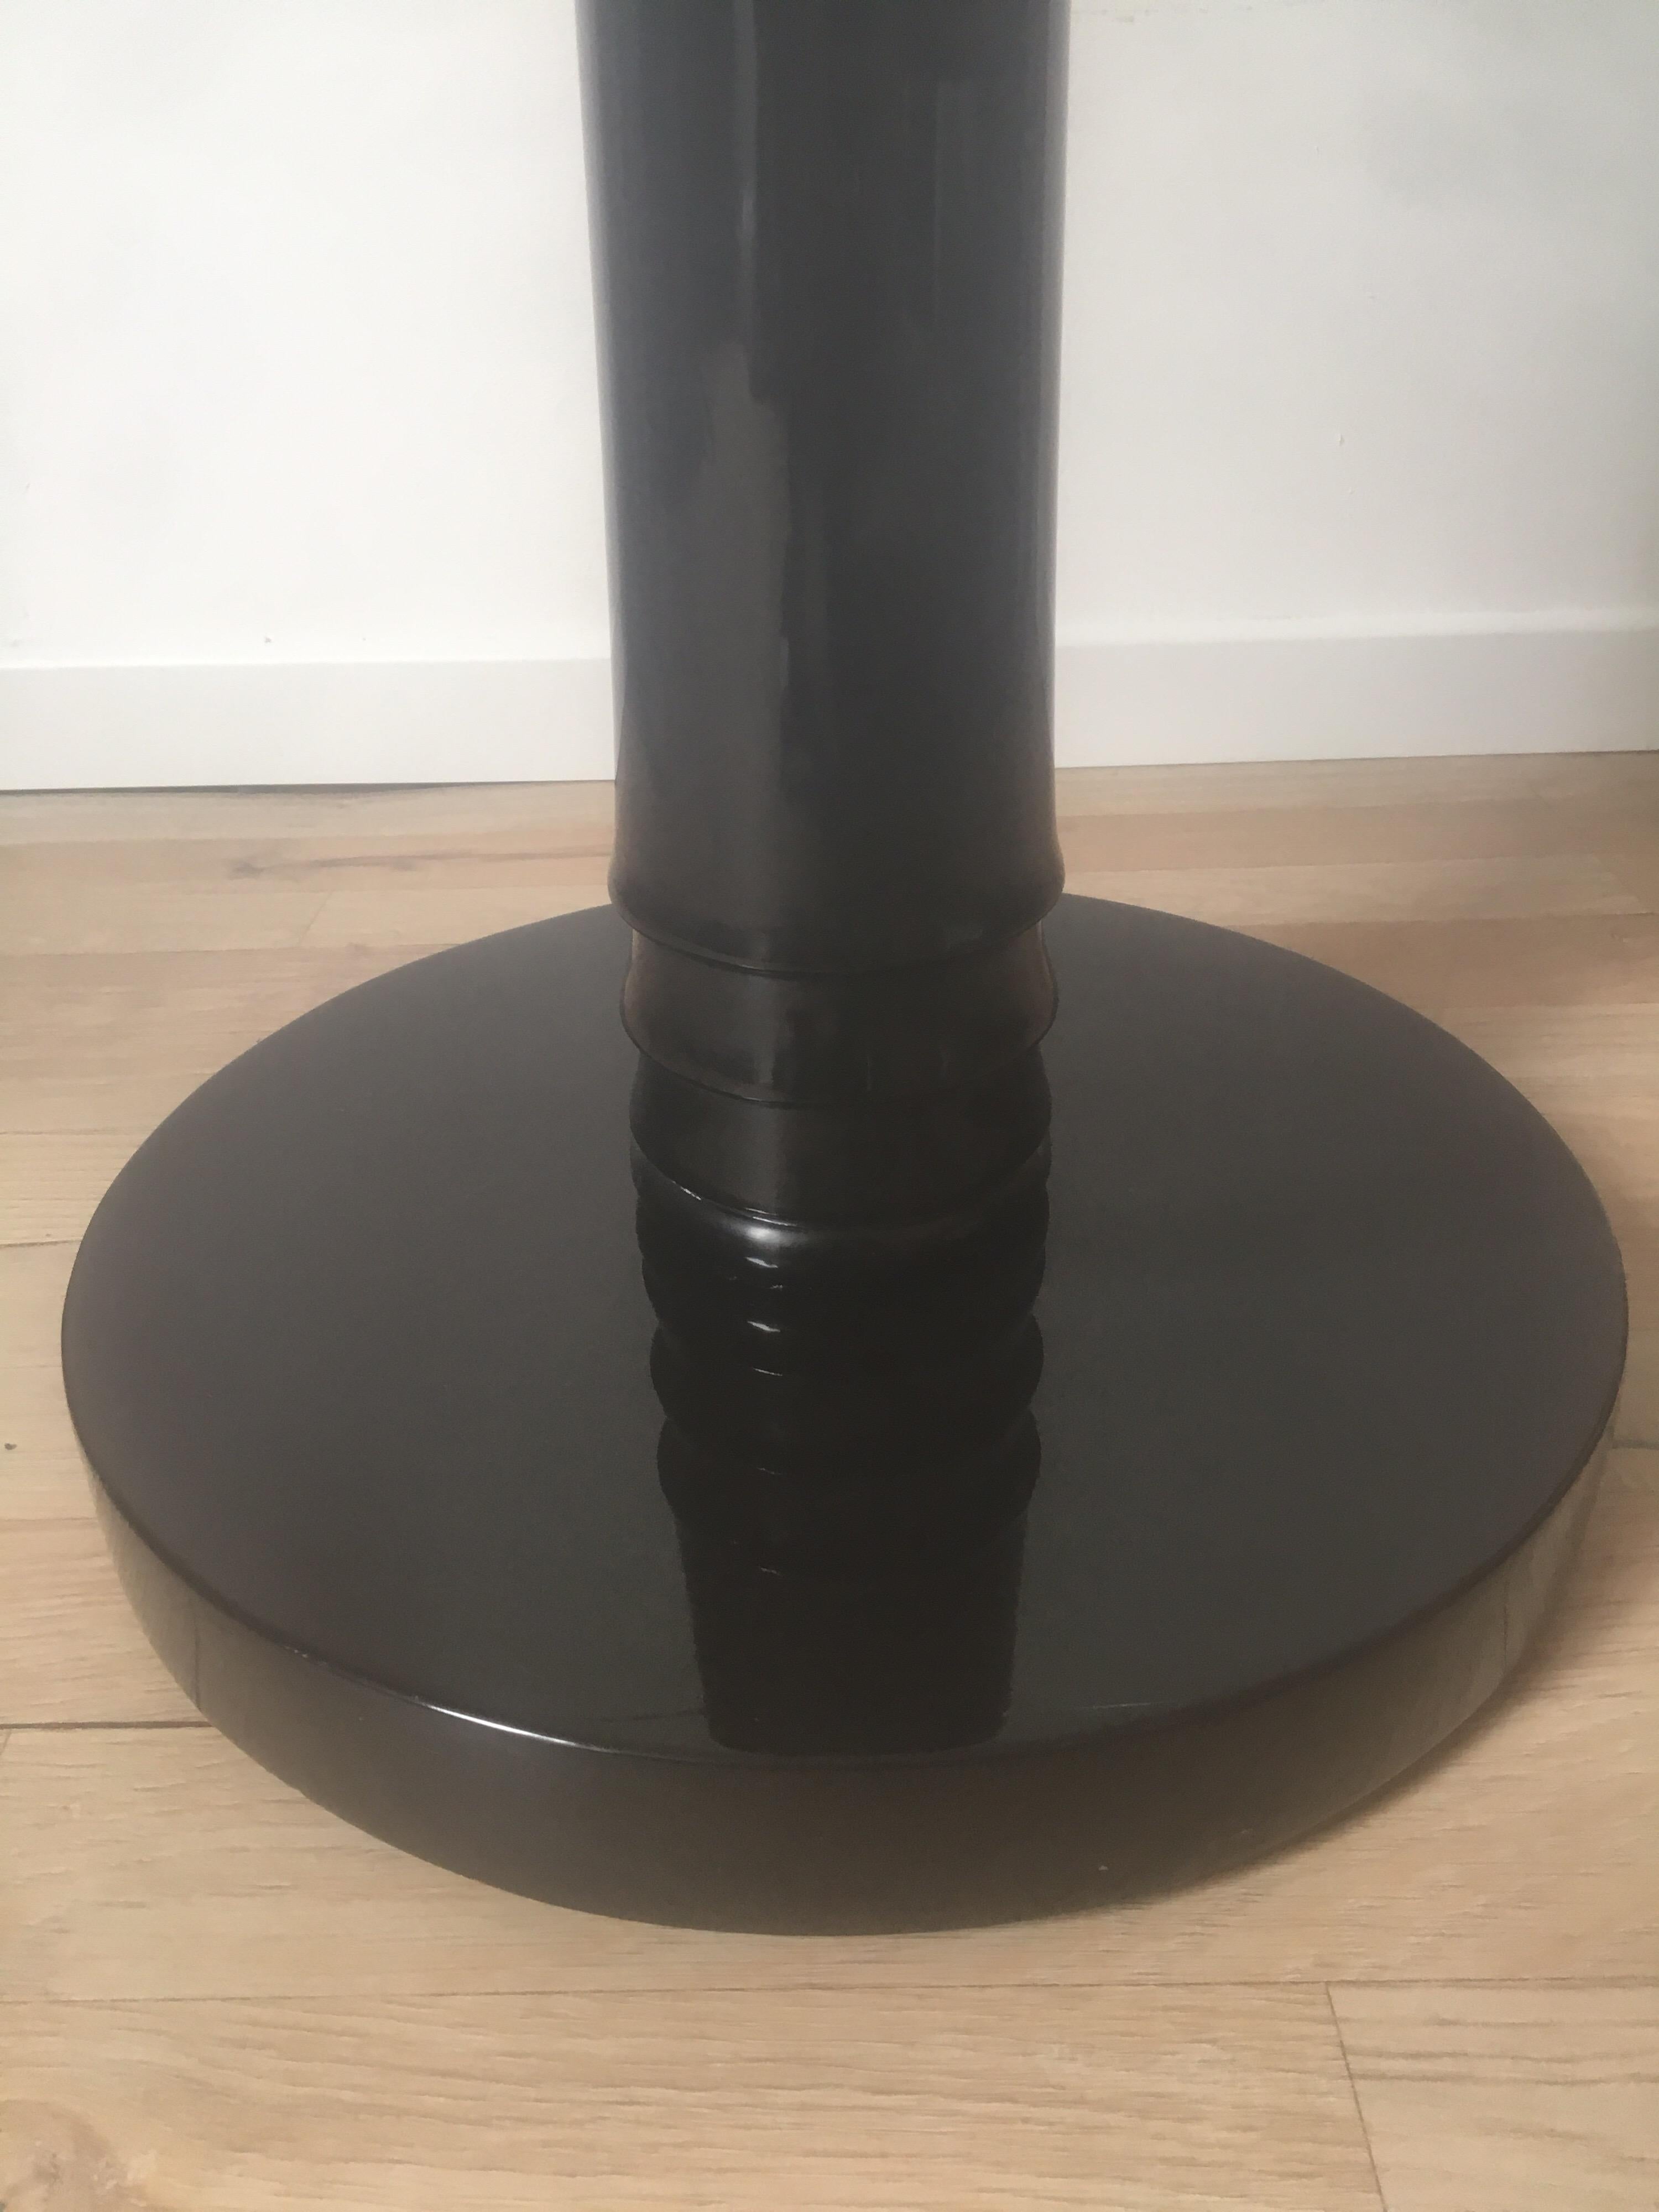 René Drouet Brown Lacquer Wood Coffee Table, Circular Glass Slab Top, 1930 For Sale 2